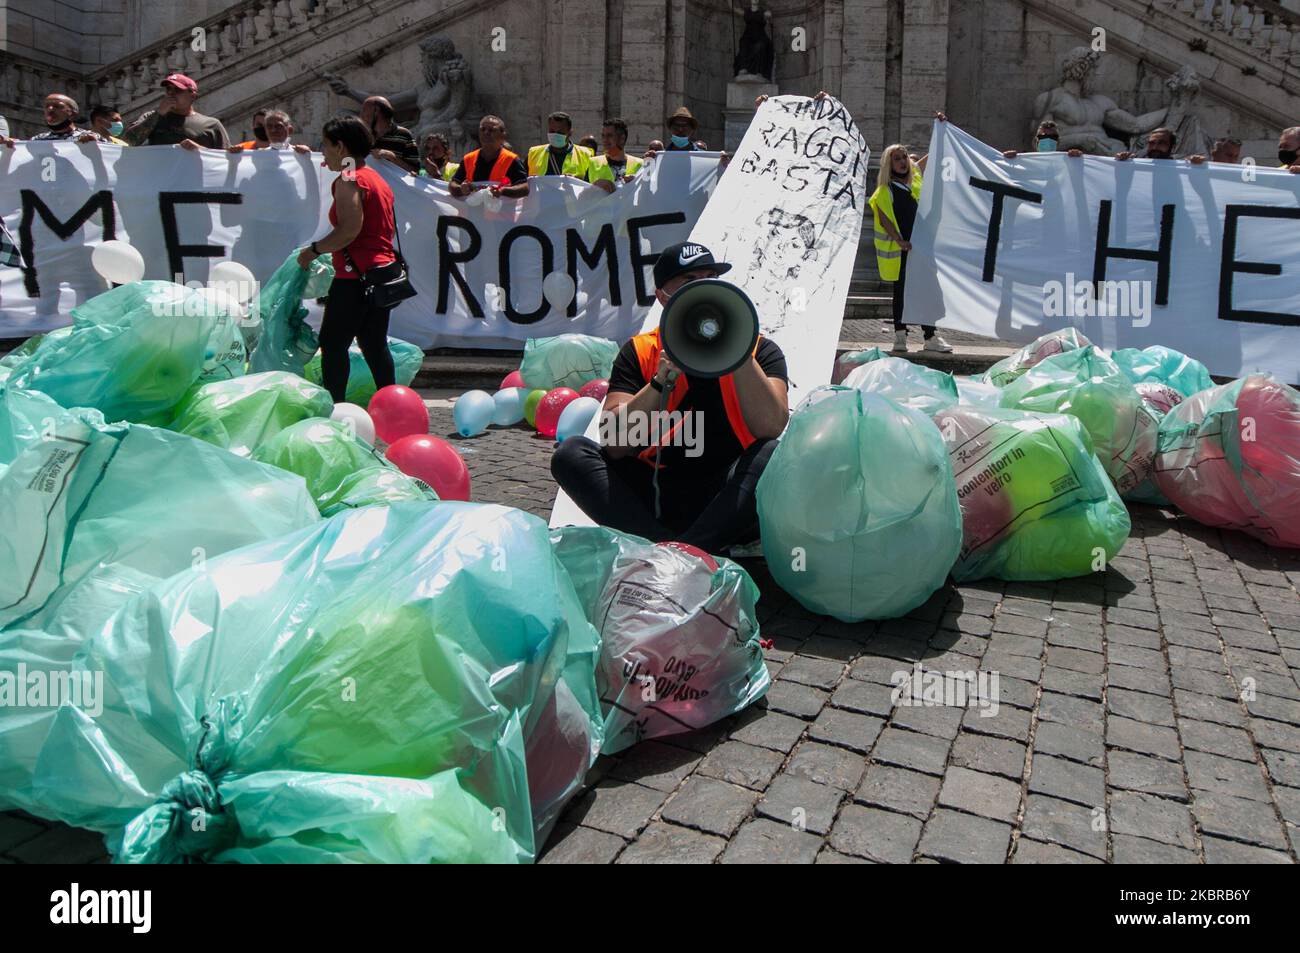 Workers of non-household users, a contract managed by Multiservizi, protest in Piazza del Campidoglio fake garbage bags on the square on June 18, 2020 in Rome , Italy. 'Welcome to Rome, the city of rubbish' the banner displayed by protesters. With the downsizing of the door-to-door service for non-household users by Ama, Multiservizi has left the contract and now 270 operators risk losing their jobs. (Photo by Andrea Ronchini/NurPhoto) Stock Photo